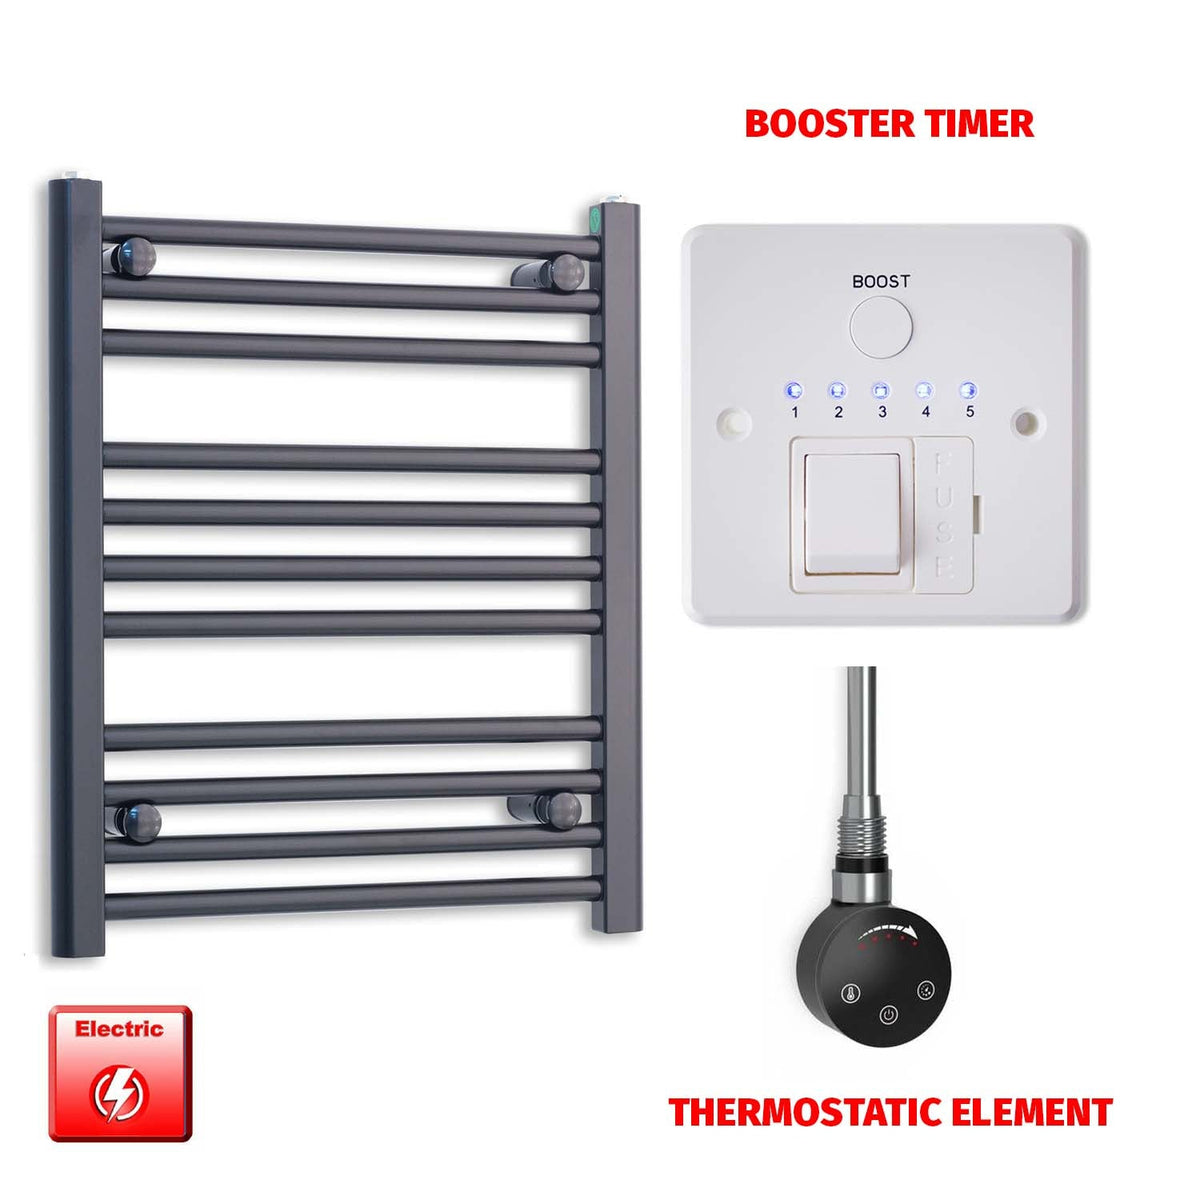 600 x 500 Flat Black Pre-Filled Electric Heated Towel Radiator HTR Smart Thermostatic Booster Timer